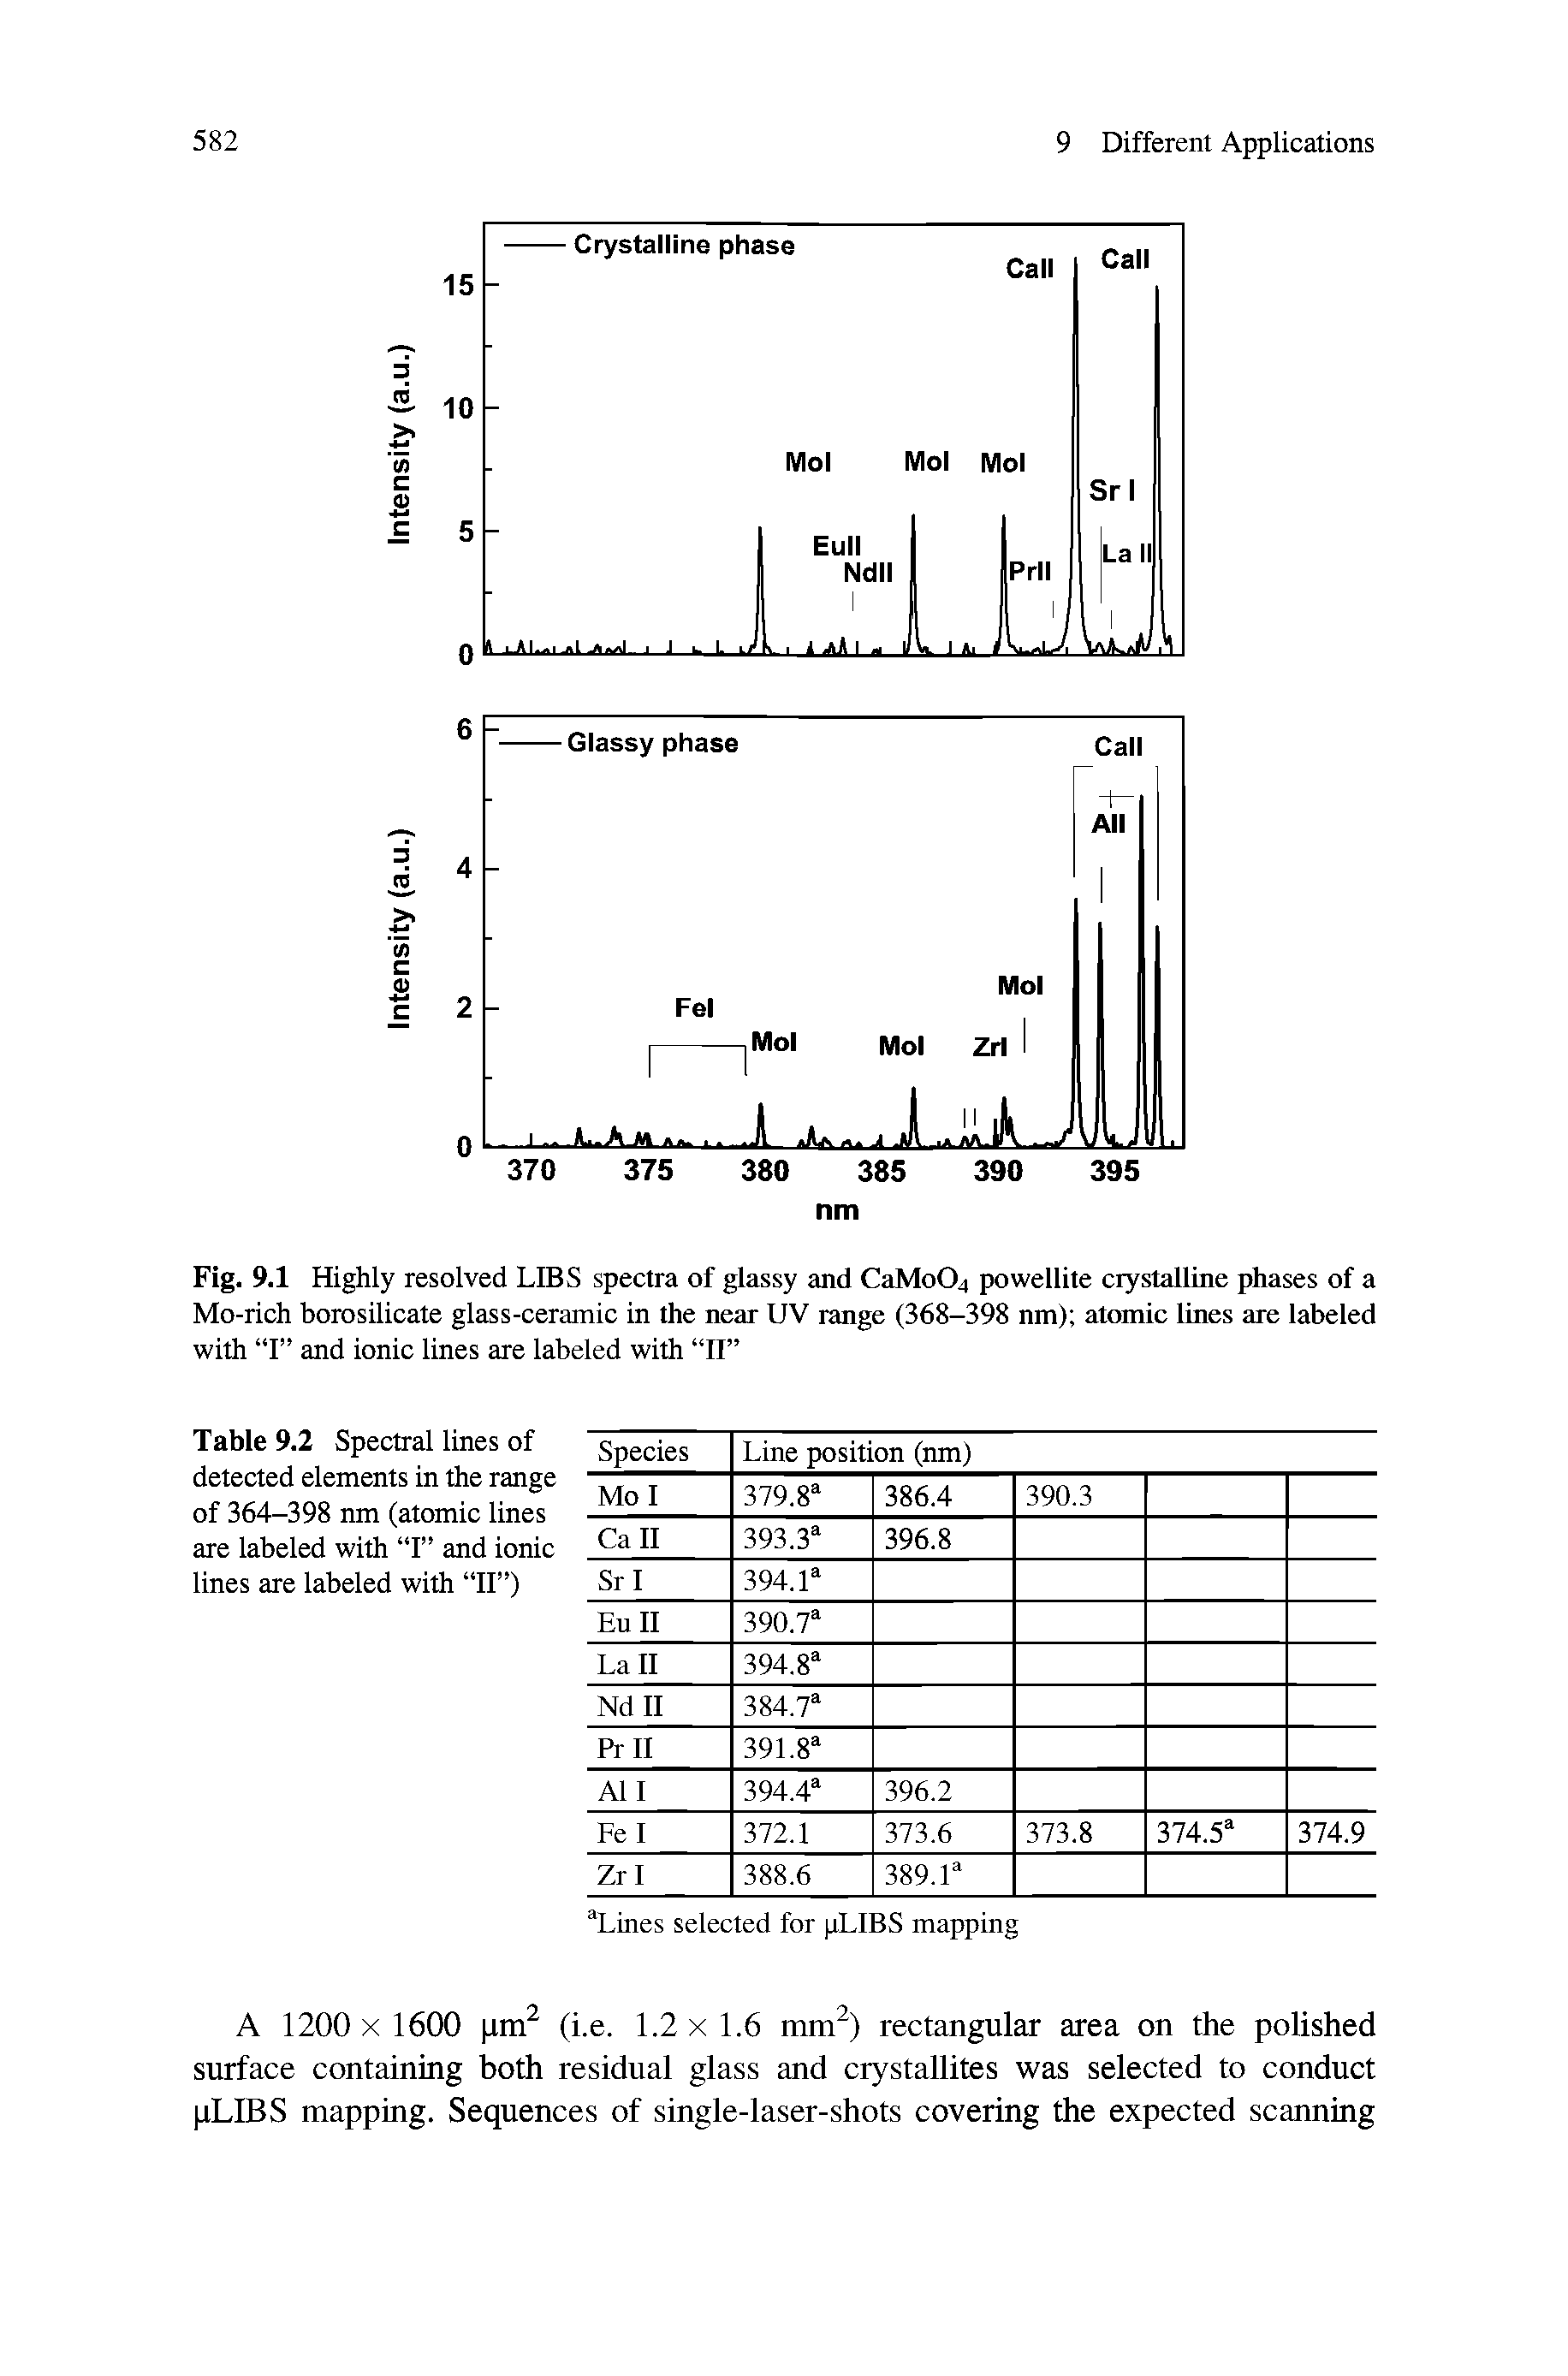 Fig. 9.1 Highly resolved LIBS spectra of glassy and CaMo04 powellite crystalline phases of a Mo-rich borosilicate glass-ceramic in the near UV range (368-398 nm) atomic lines are labeled with I and ionic lines are labeled with 11 ...